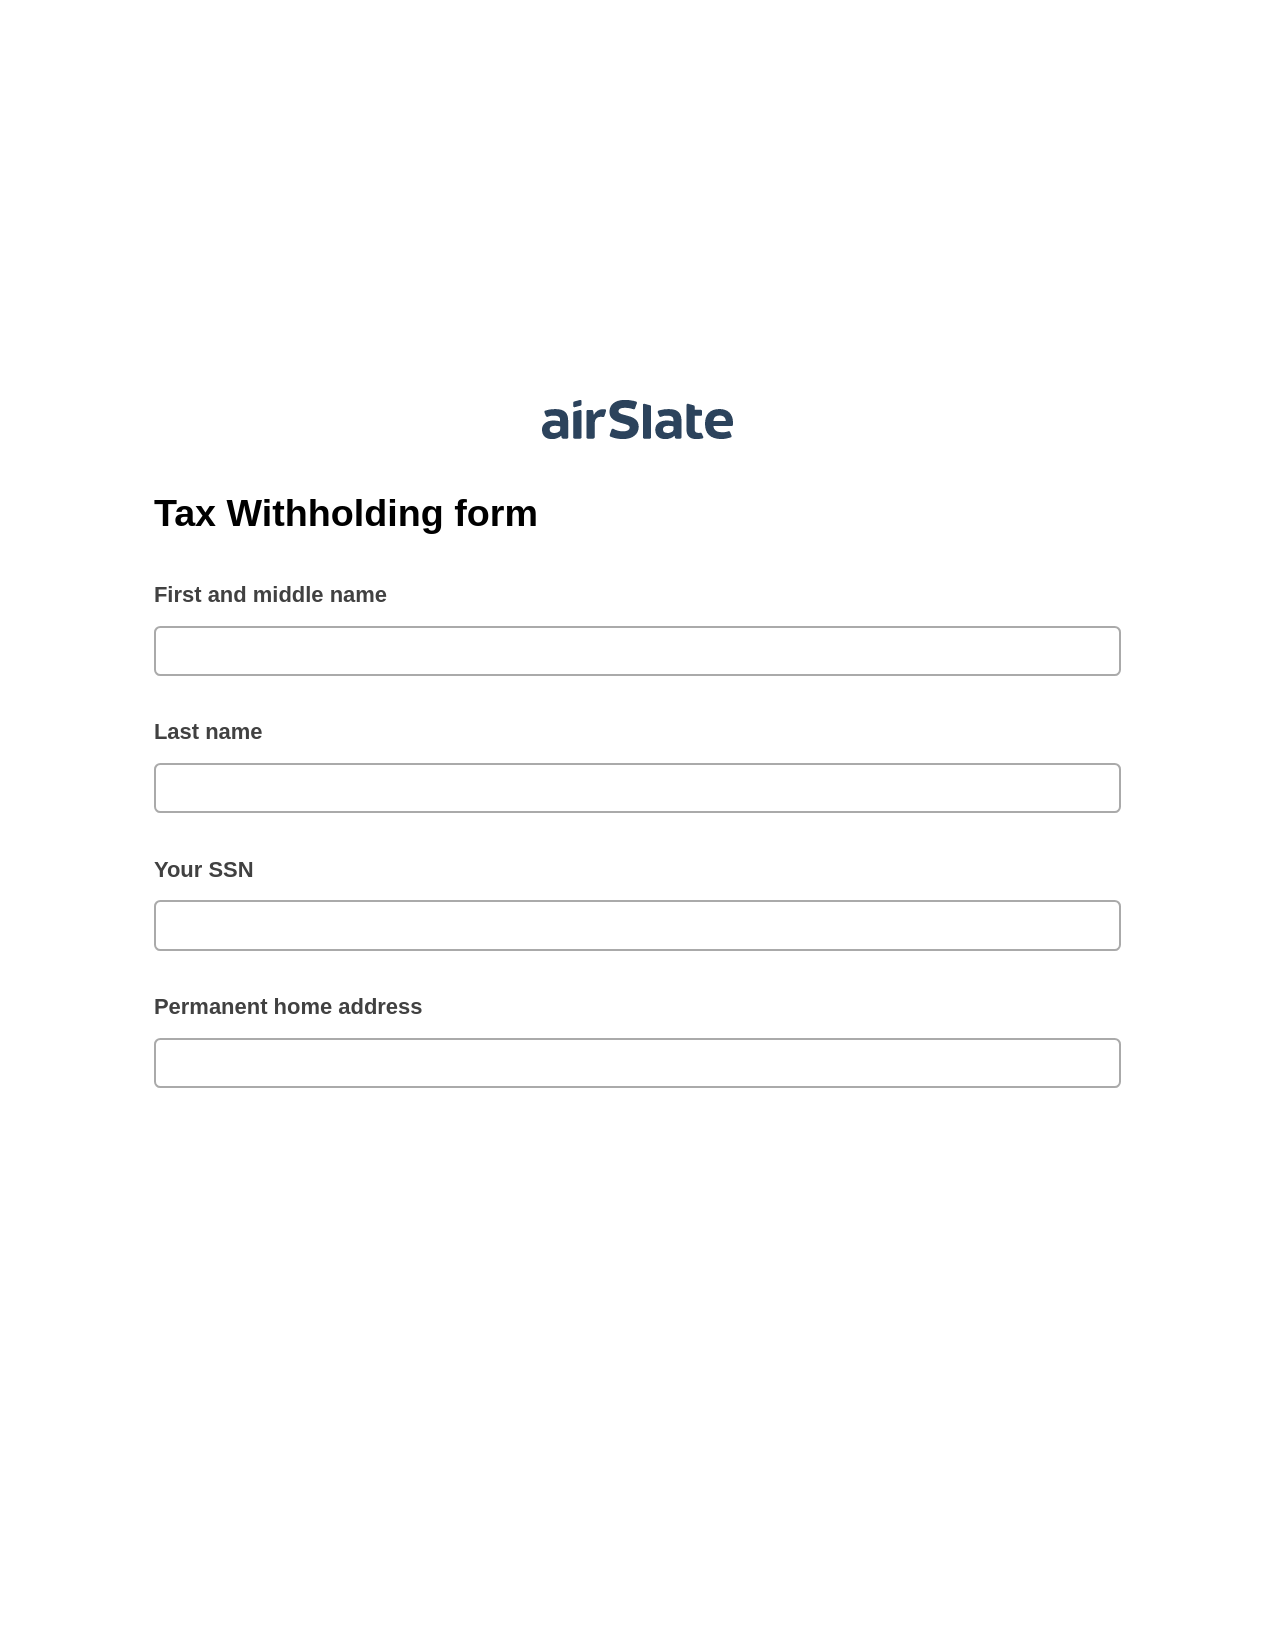 Multirole Tax Withholding form Pre-fill Slate from MS Dynamics 365 Records Bot, Update Salesforce Records Bot, Post-finish Document Bot